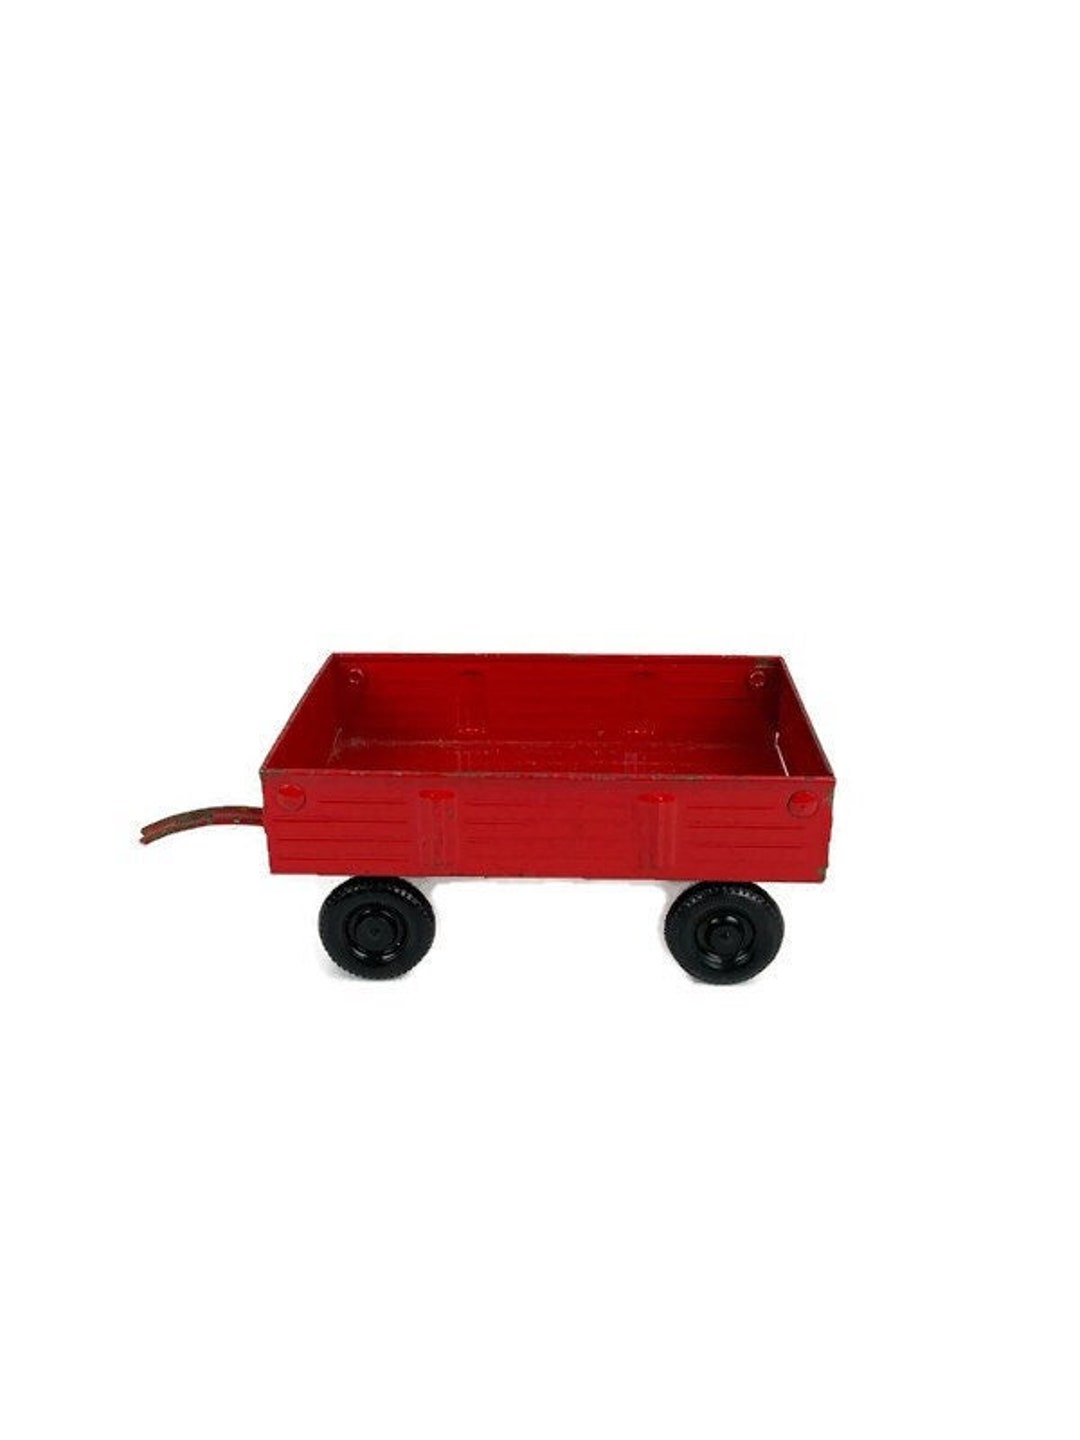 Vintage ERTL Red Metal Trailer Made in USA Pressed Steel pic photo photo